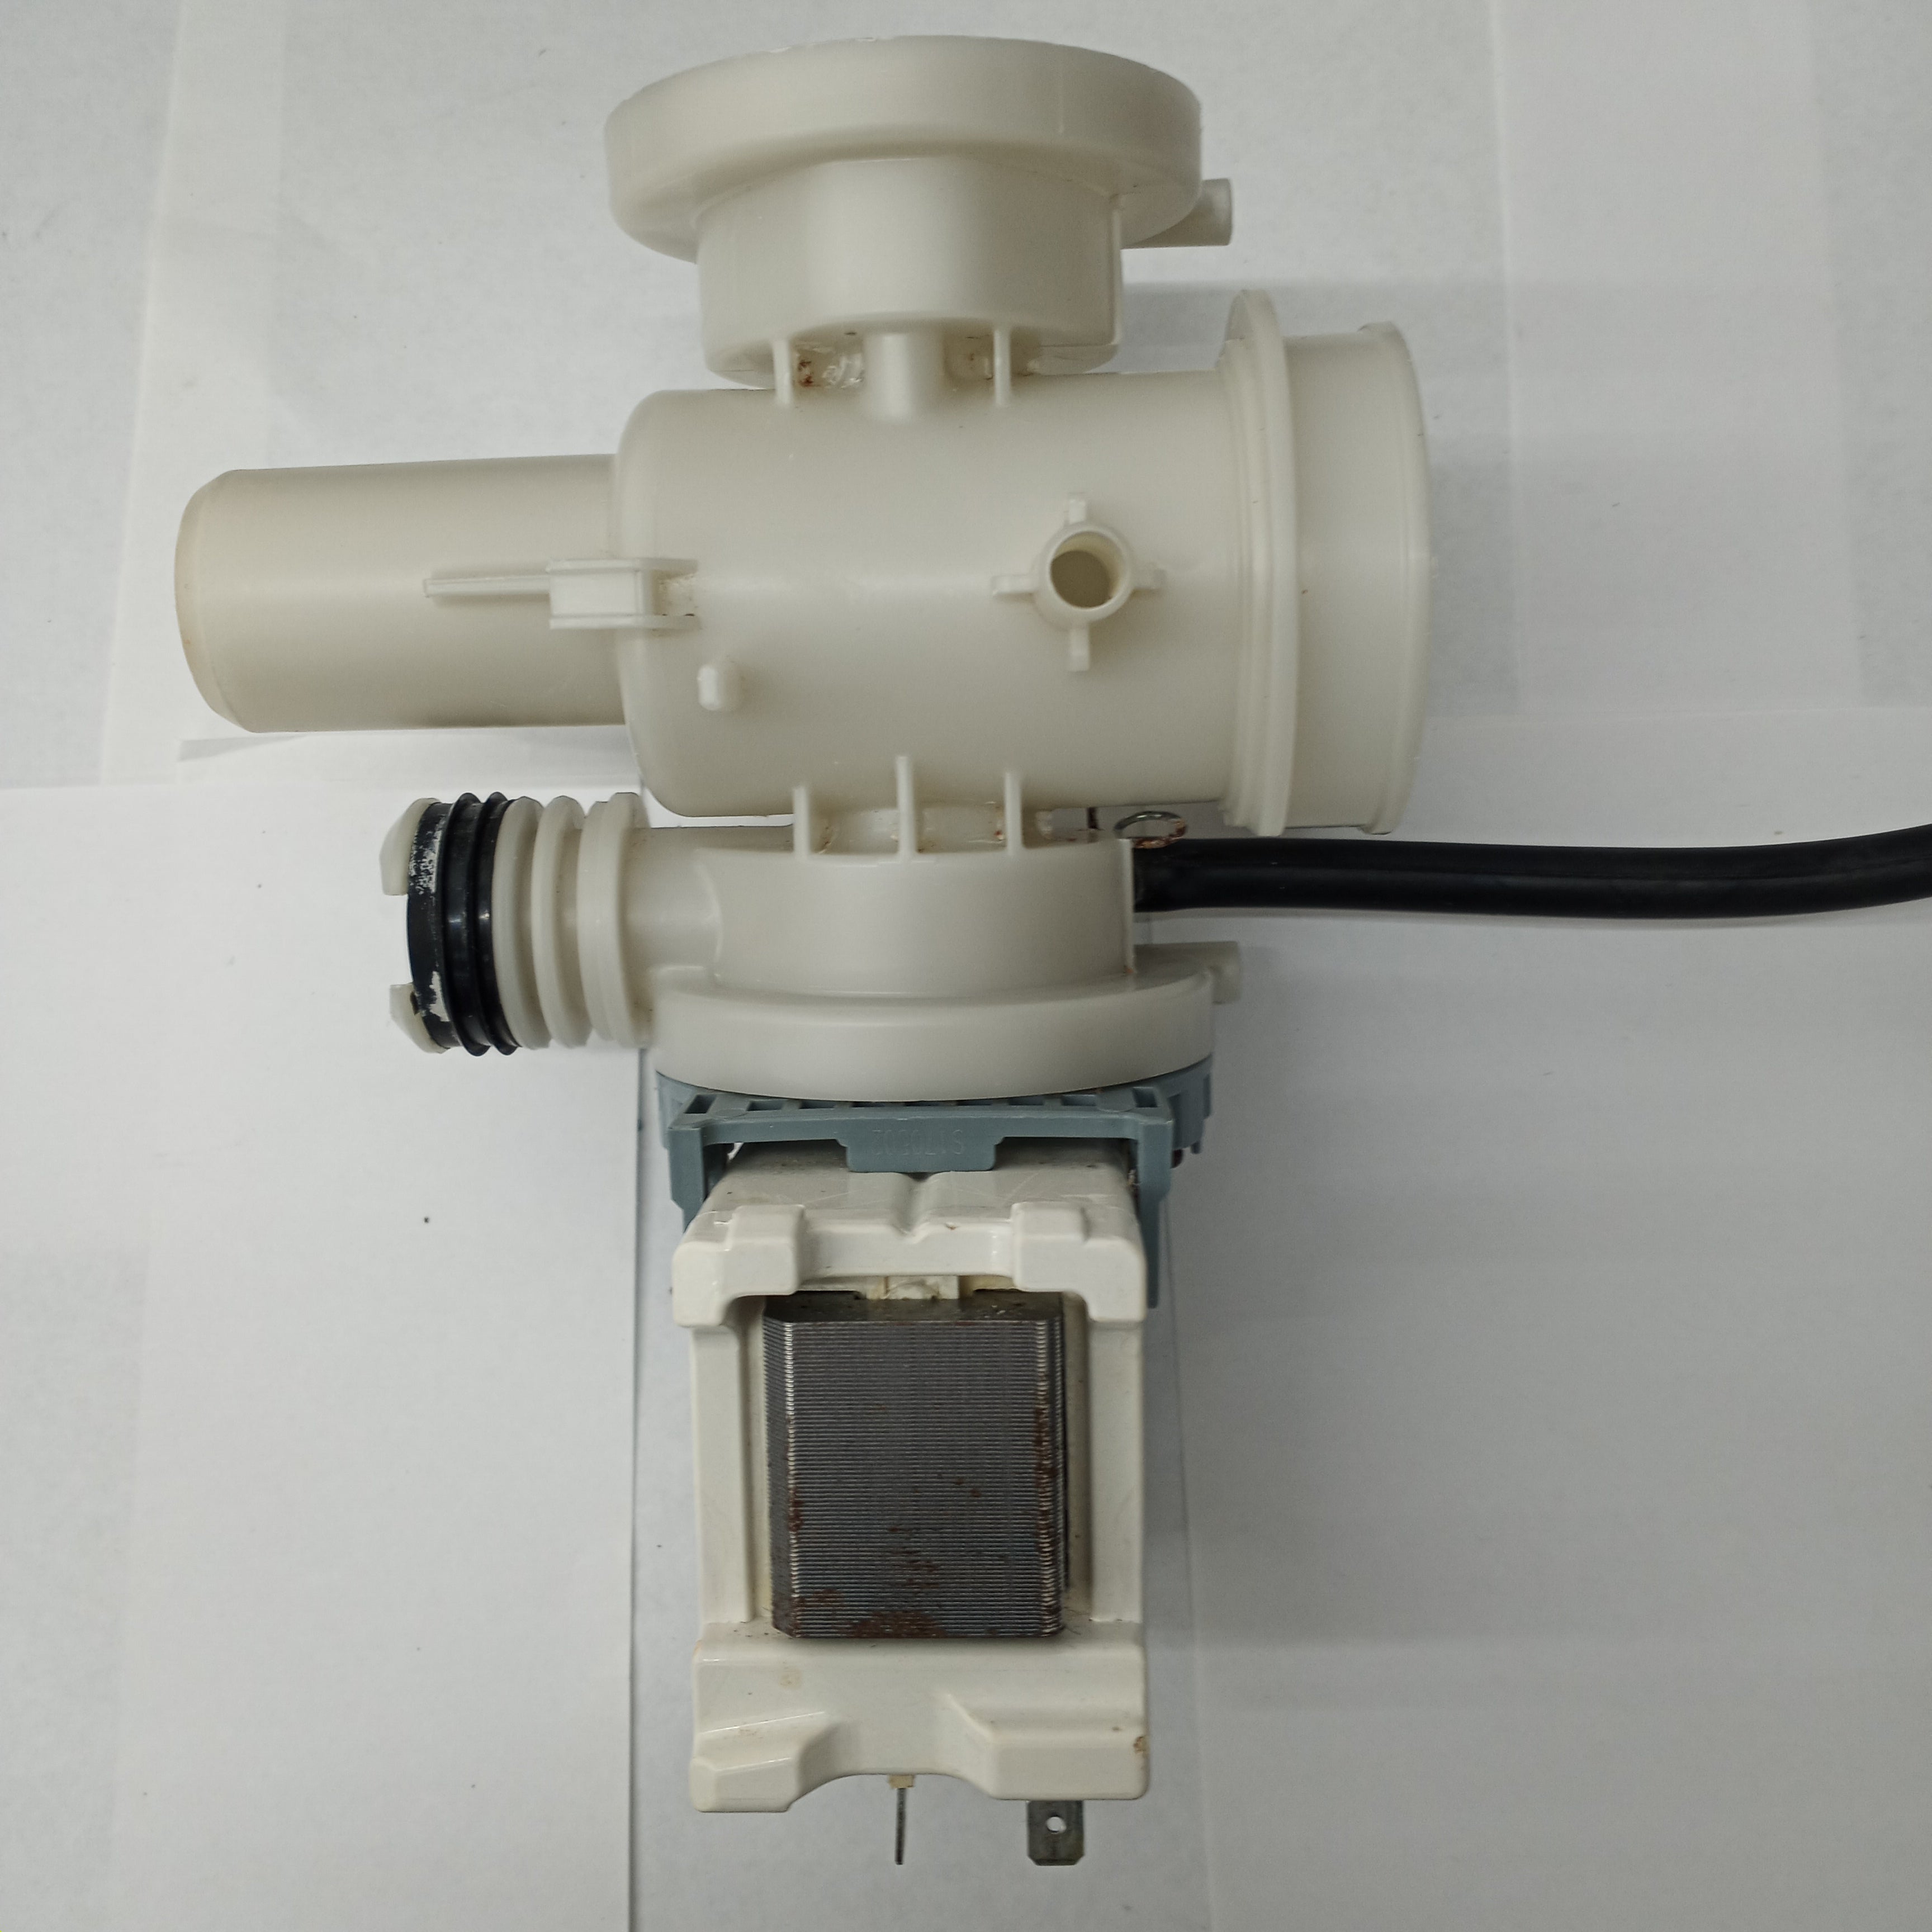 Samsung-Washer Drain-Pump-Motor-and-Impeller-DC31-00178A